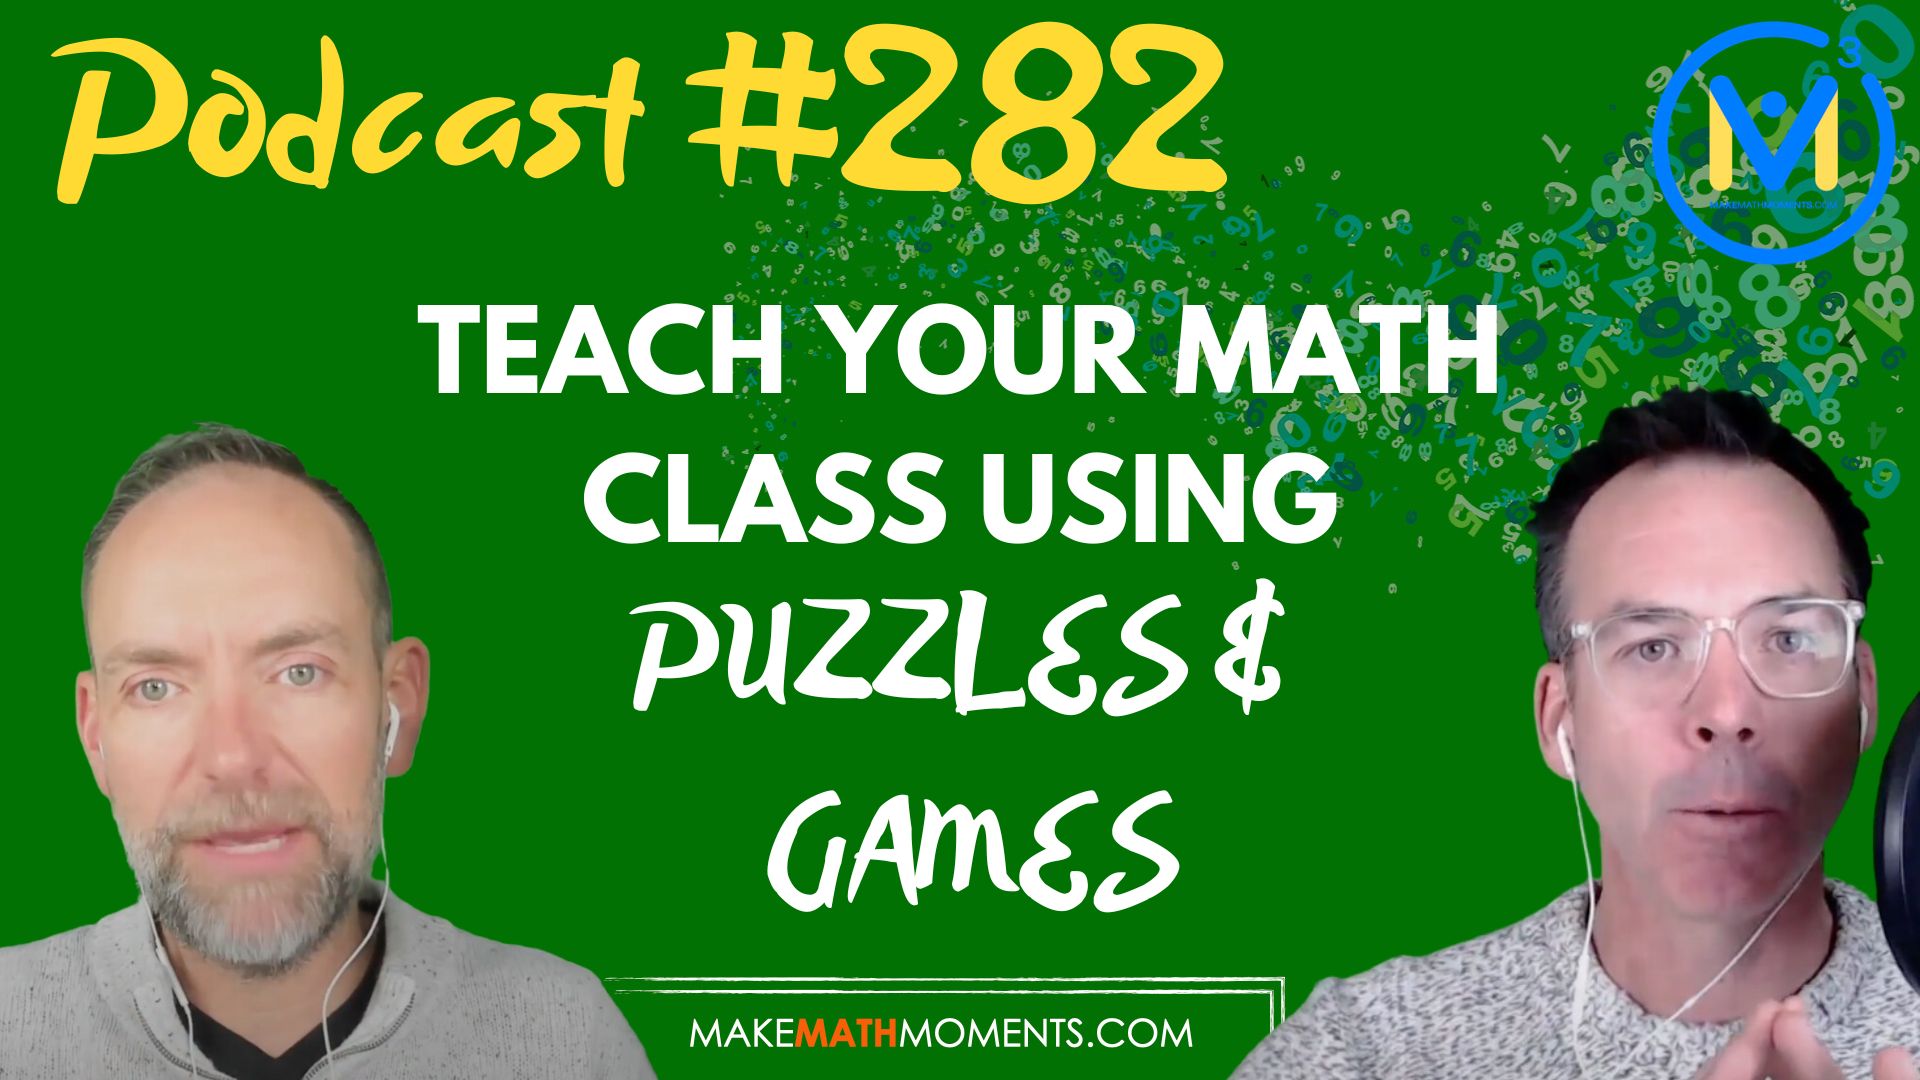 Episode #282: Teach Your Math Class Using Puzzles & Games – An Interview with Gordon Hamilton from Math Pickle